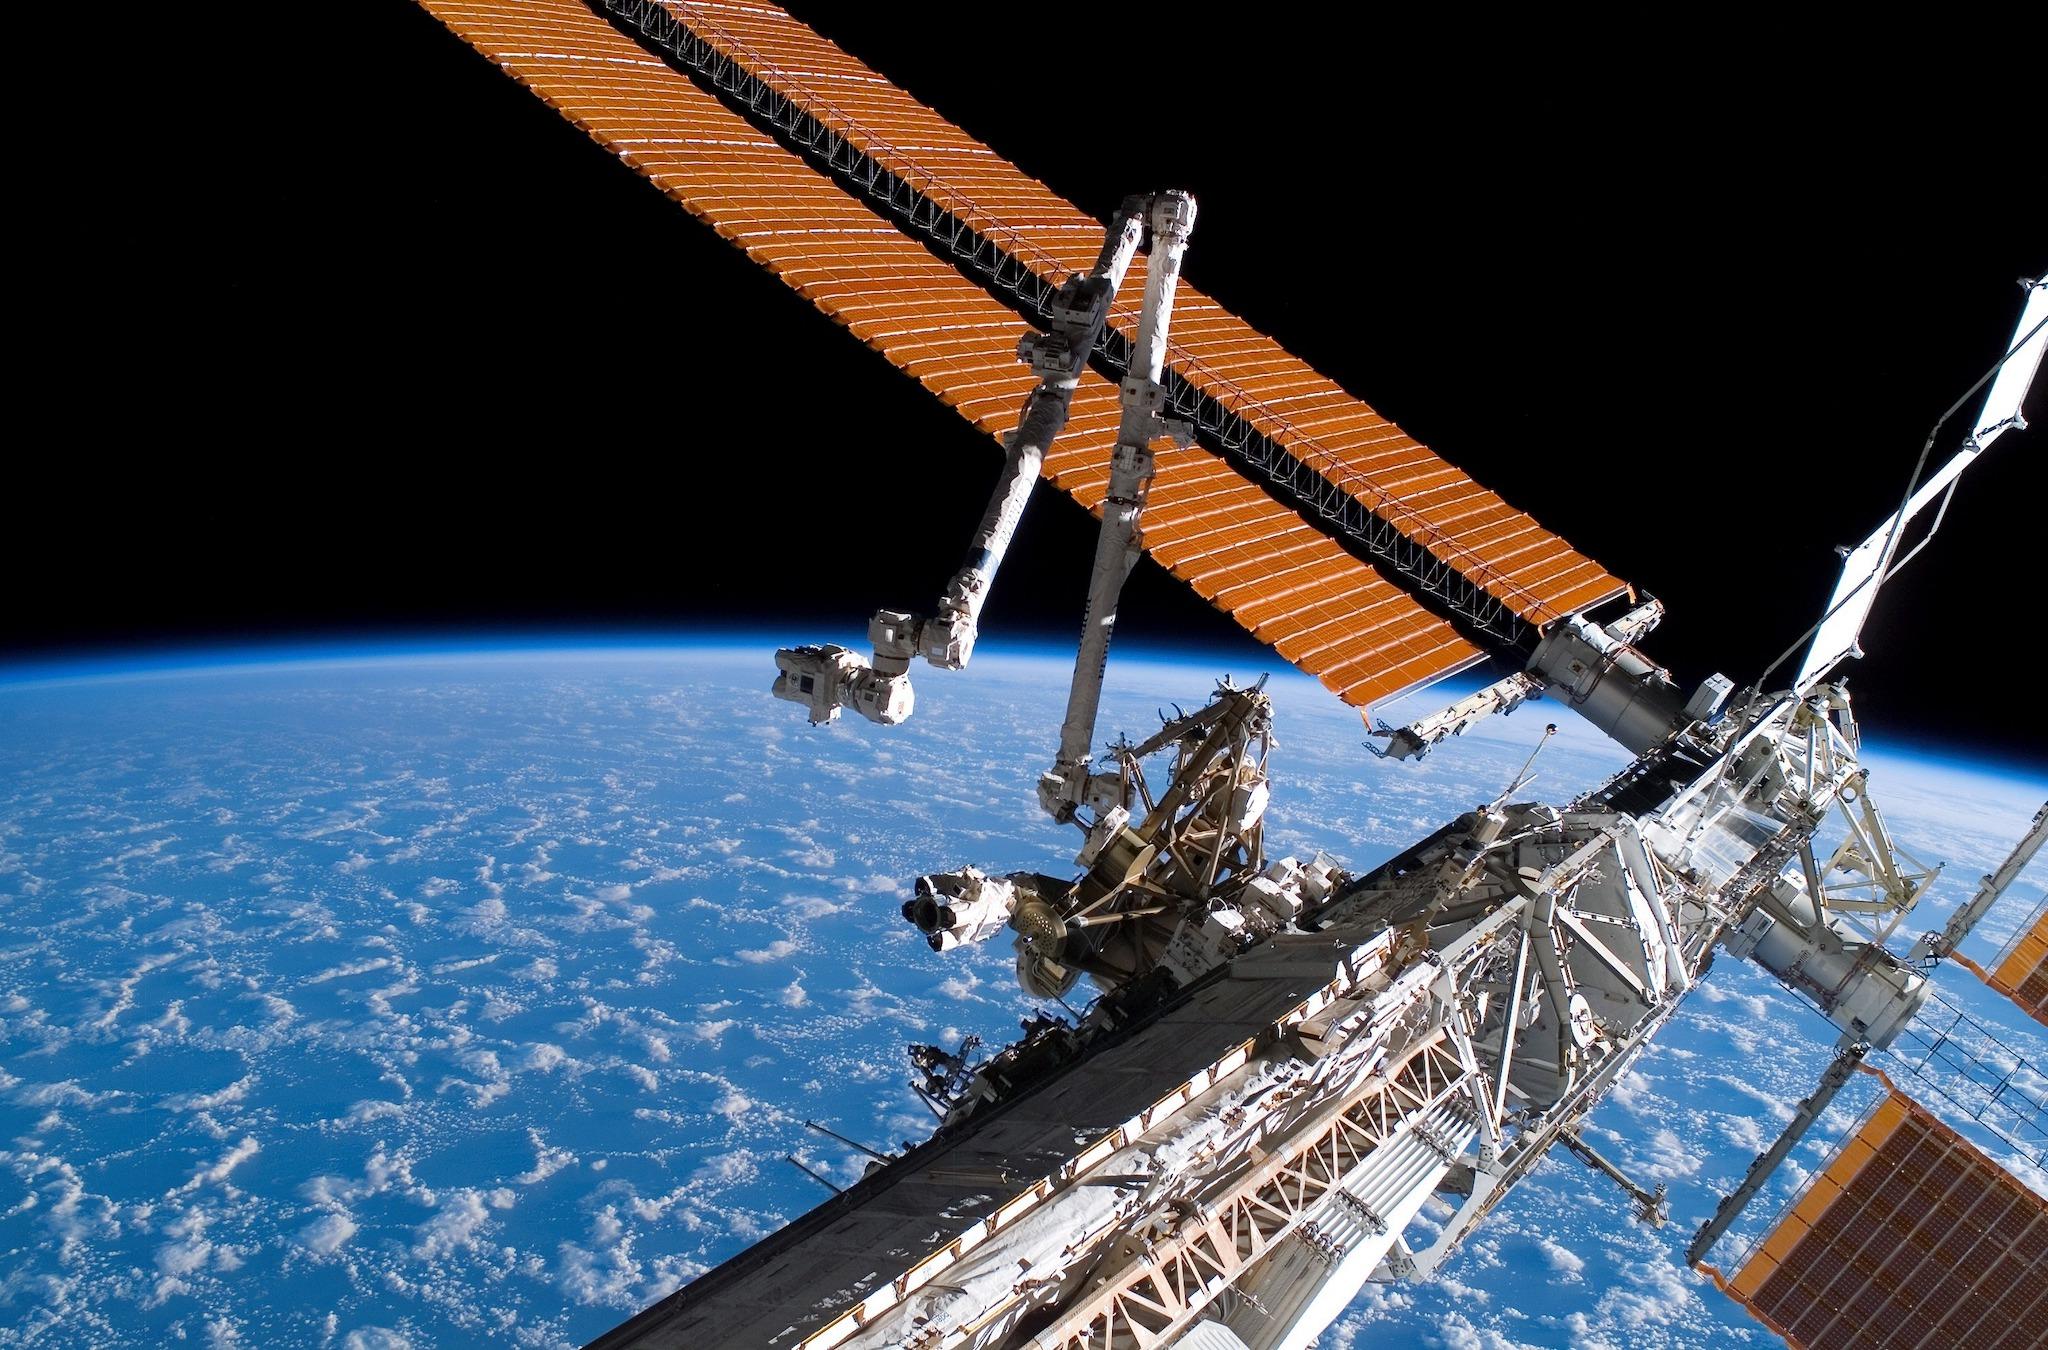 The Canadarm2 (center) and solar array panel wings on the International Space Station are extended during the mission's first planned session of extravehicular activity while Space Shuttle Endeavour (STS-118) was docked with the International Space Station